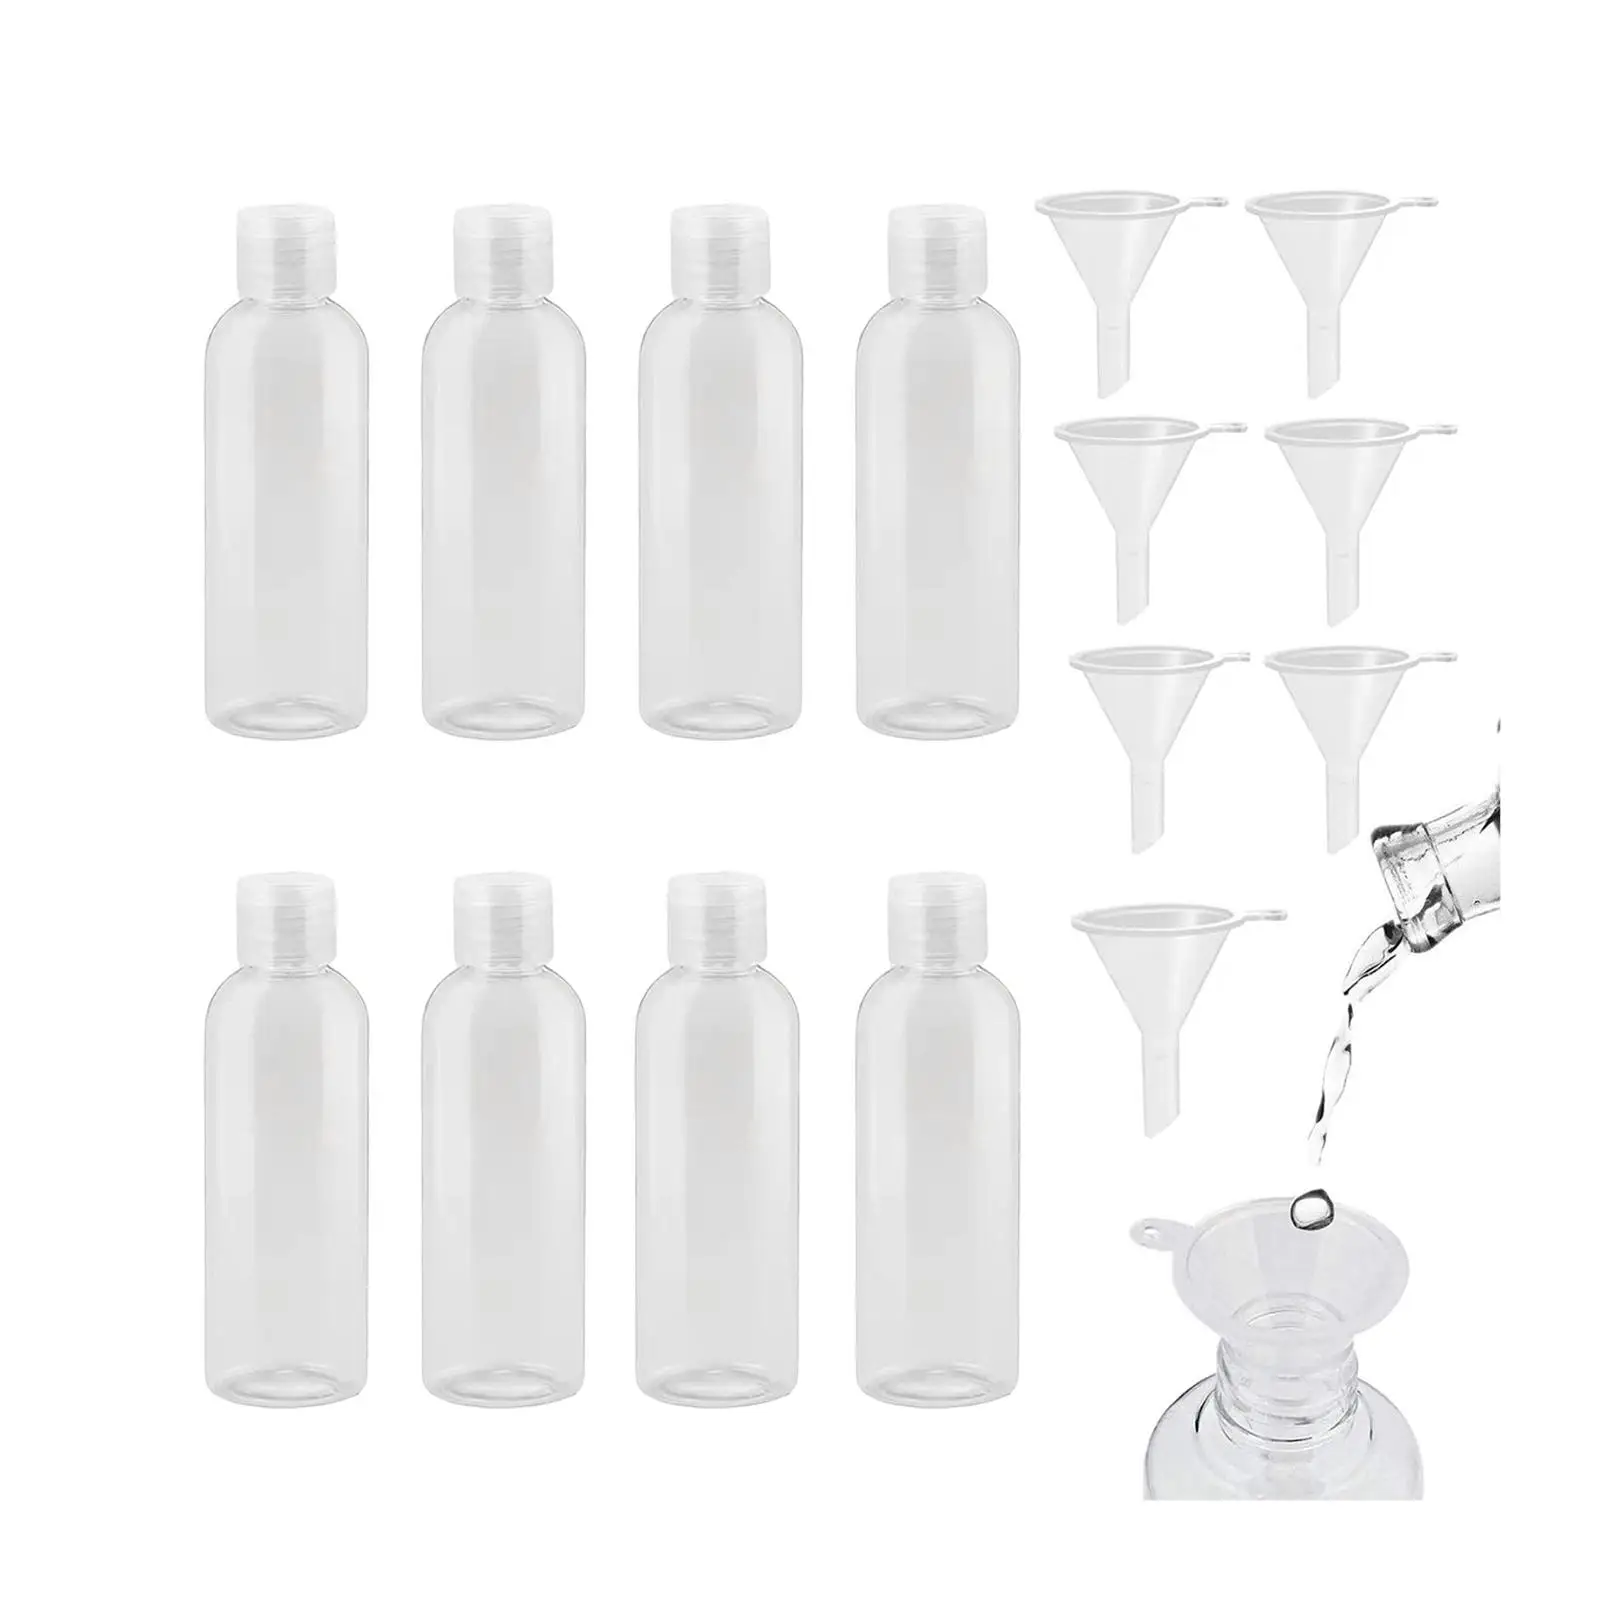 3.4oz/100ml Empty Squeeze Bottles Shampoo Lotion Cosmetic Container Travel Bottle Refillable Bottles for Outdoor Camping